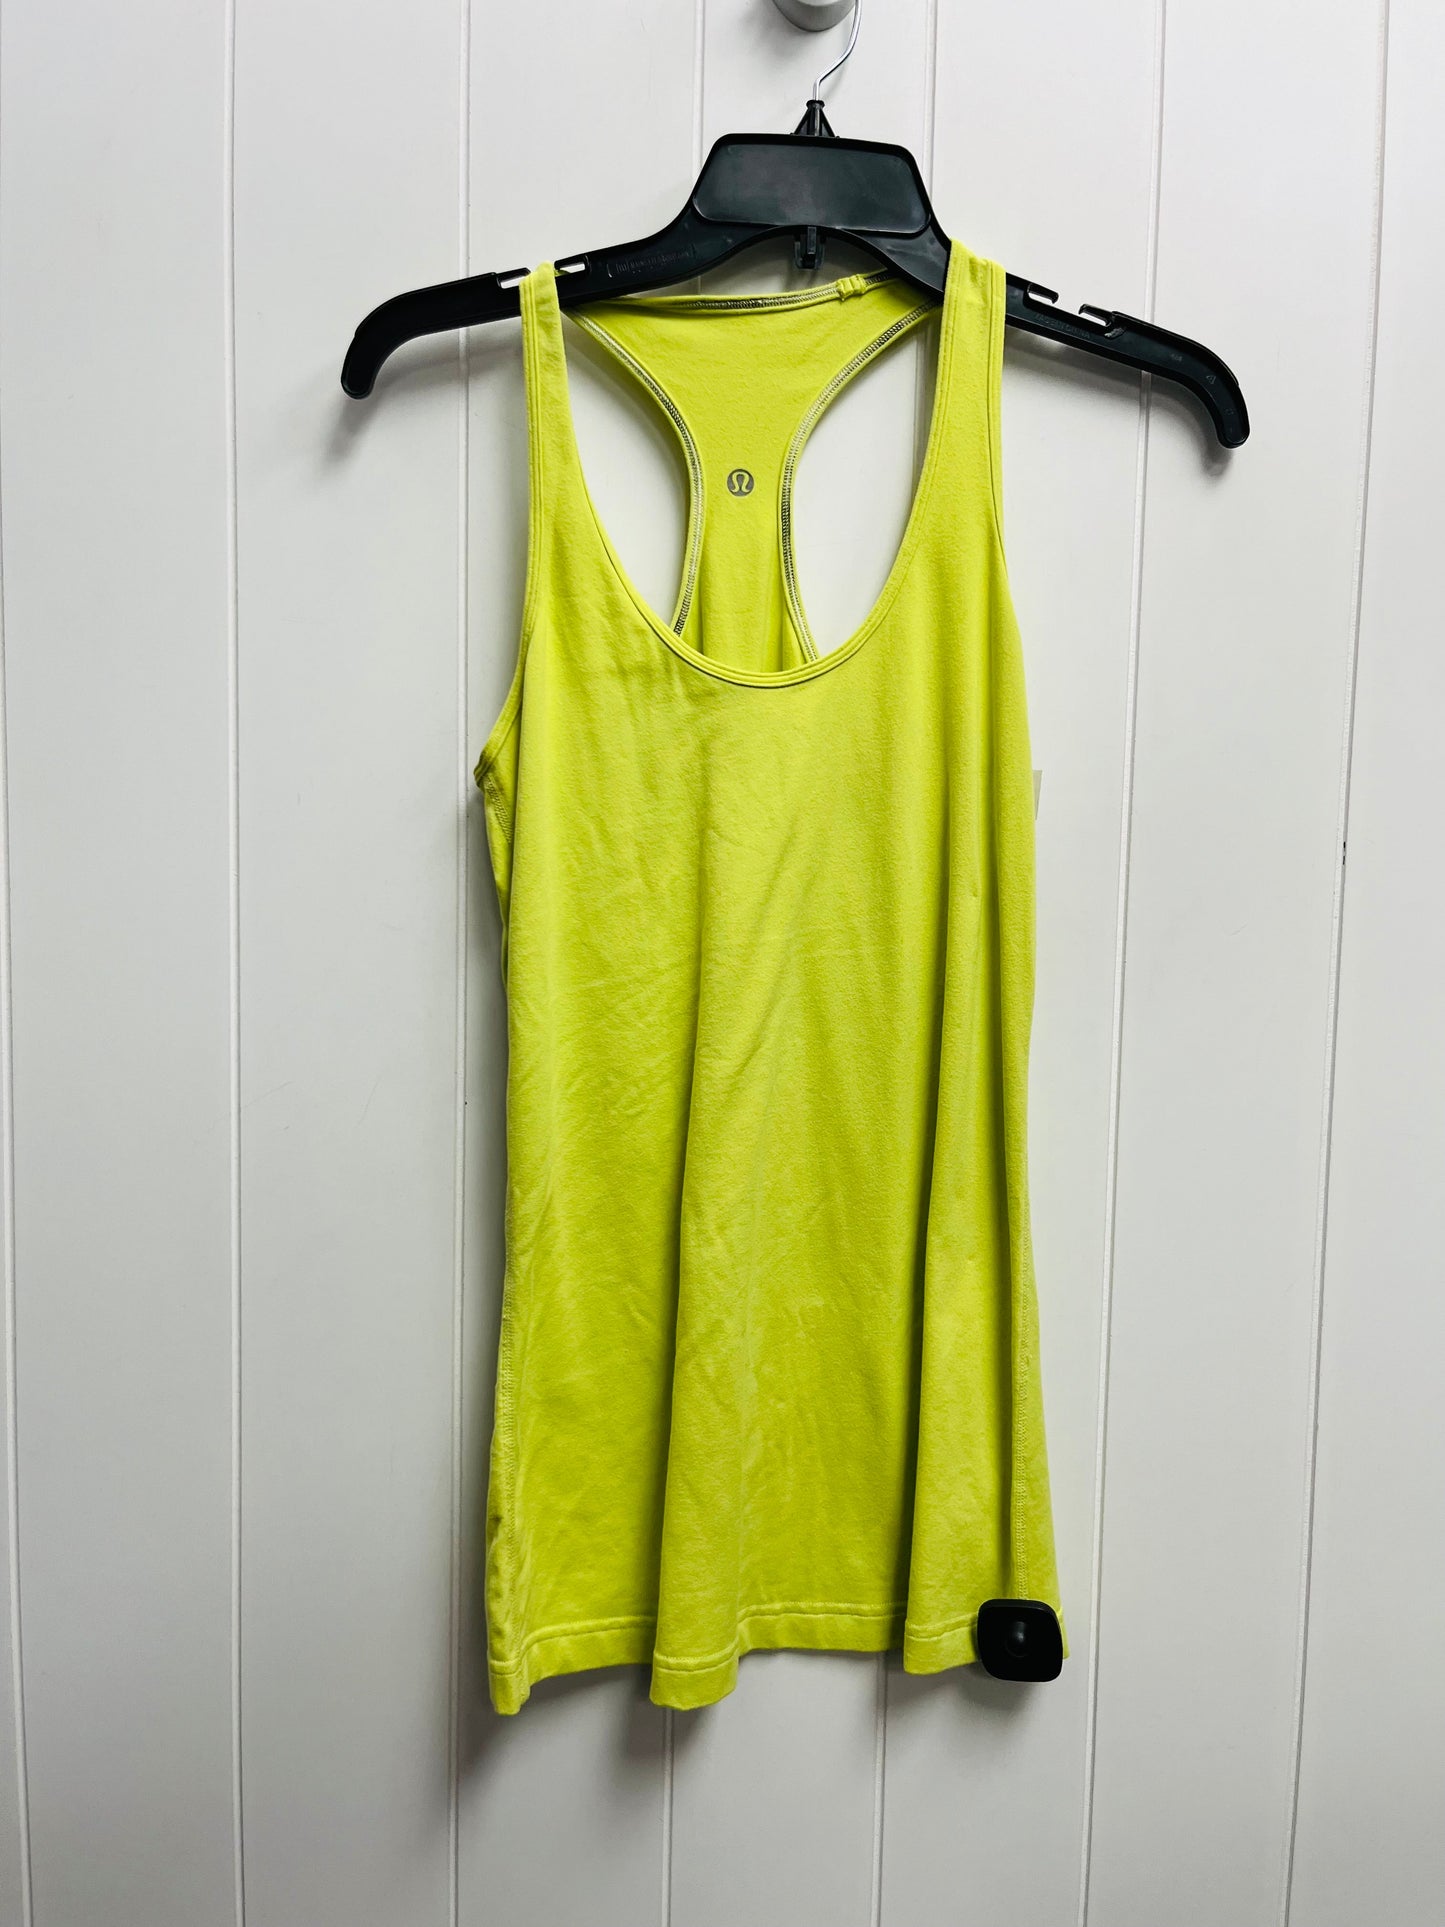 Silver Athletic Tank Top Lululemon, Size S